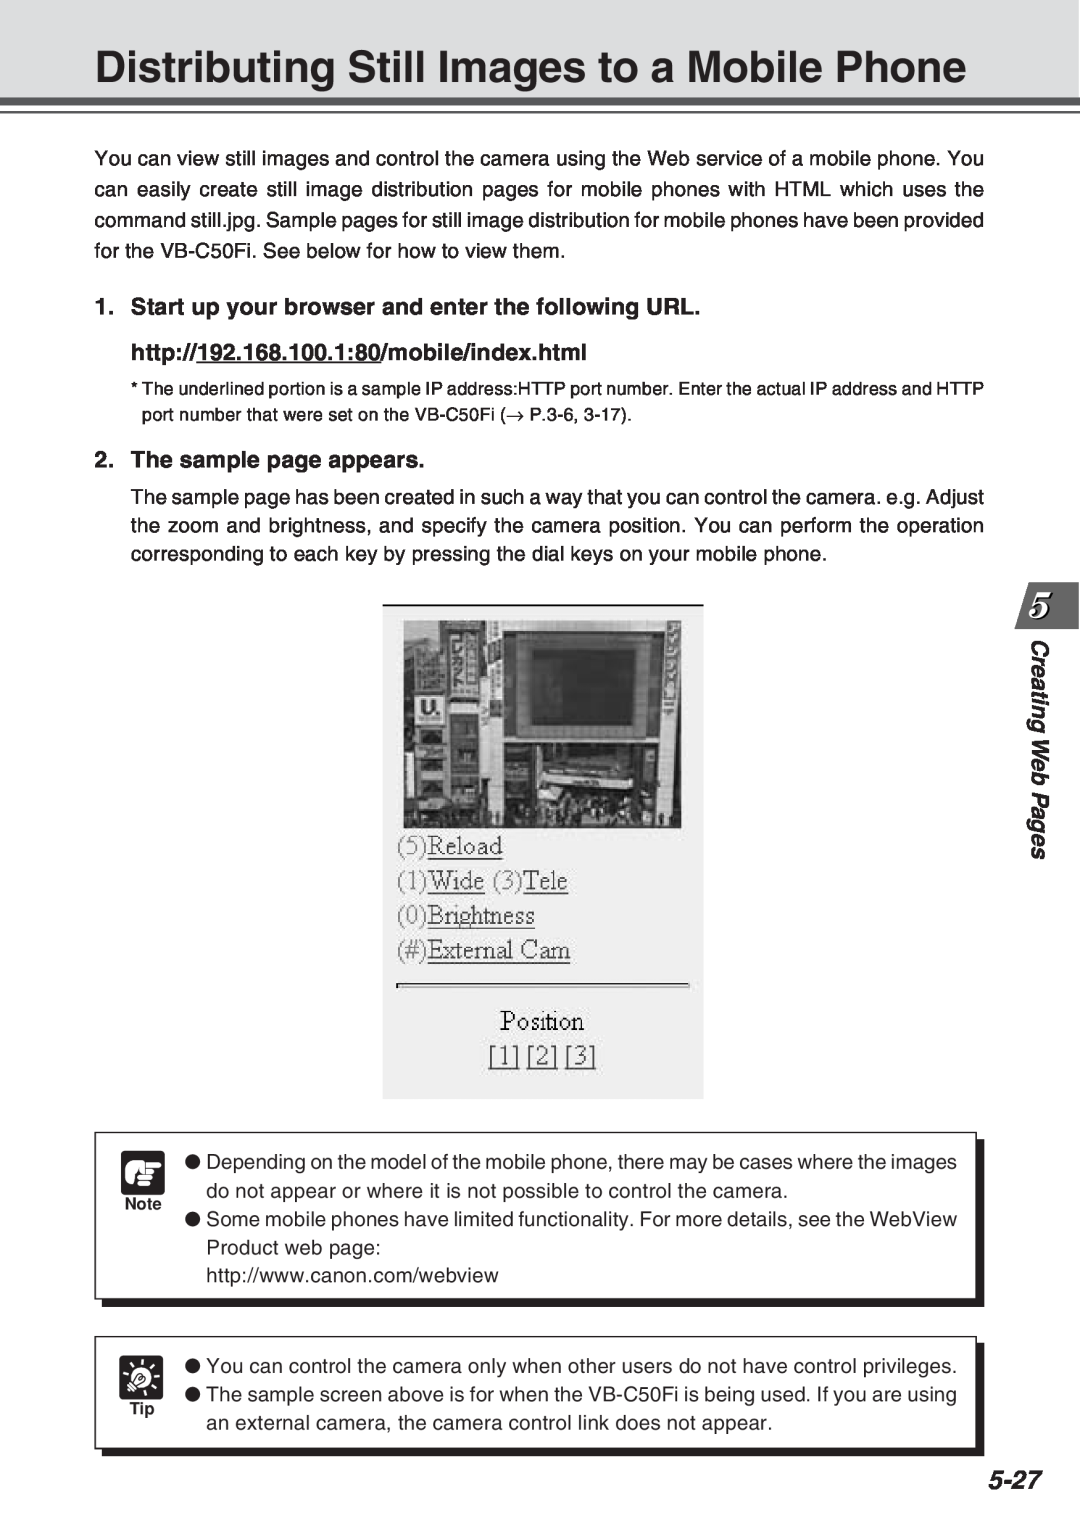 Canon Vb-C50fi user manual Distributing Still Images to a Mobile Phone, 5-27, The sample page appears, Creating Web Pages 